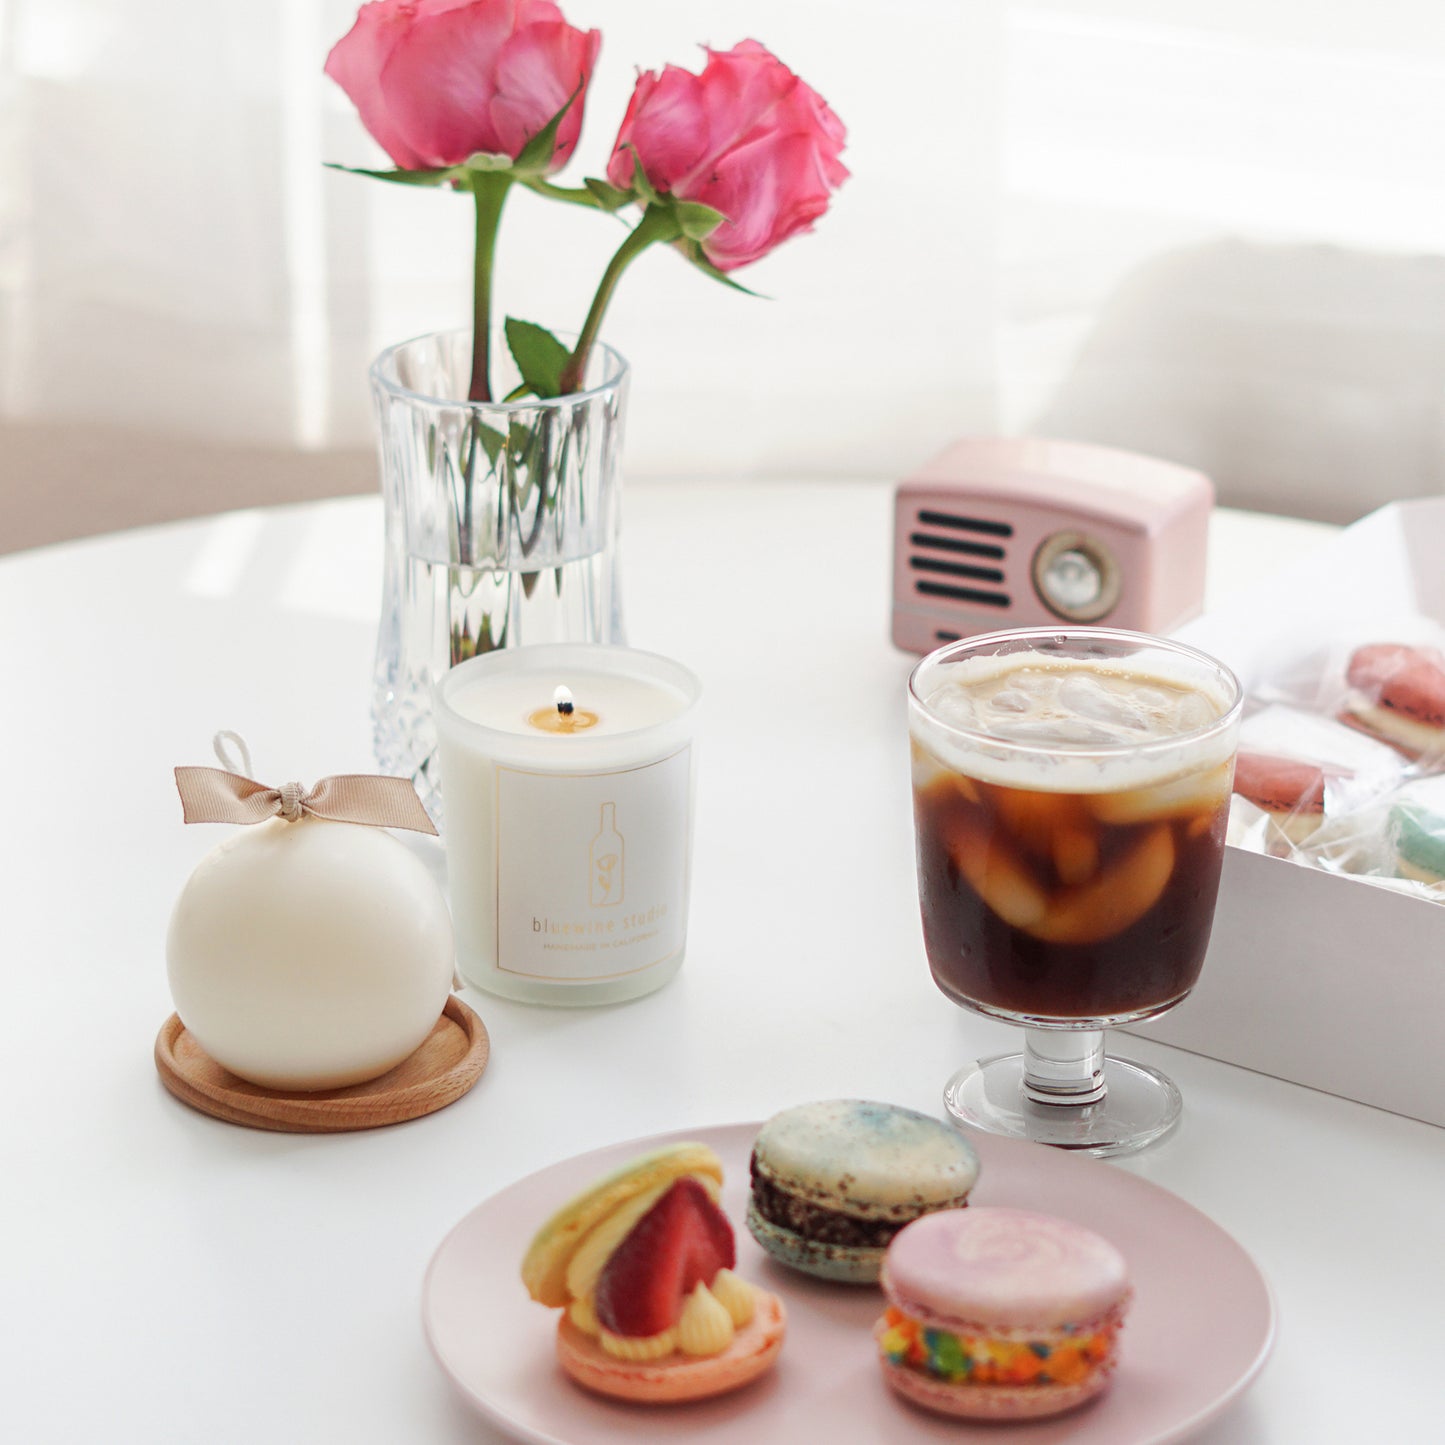 bluewine studio lit 5oz frosted glass container soy candle, a white round sphere candle with beige ribbon on the round light wood coaster, colorful macarons on a pink plate, iced americano in a goblet glass, two pink roses in a glass vase, pink speaker, and a box of macarons on the white round table